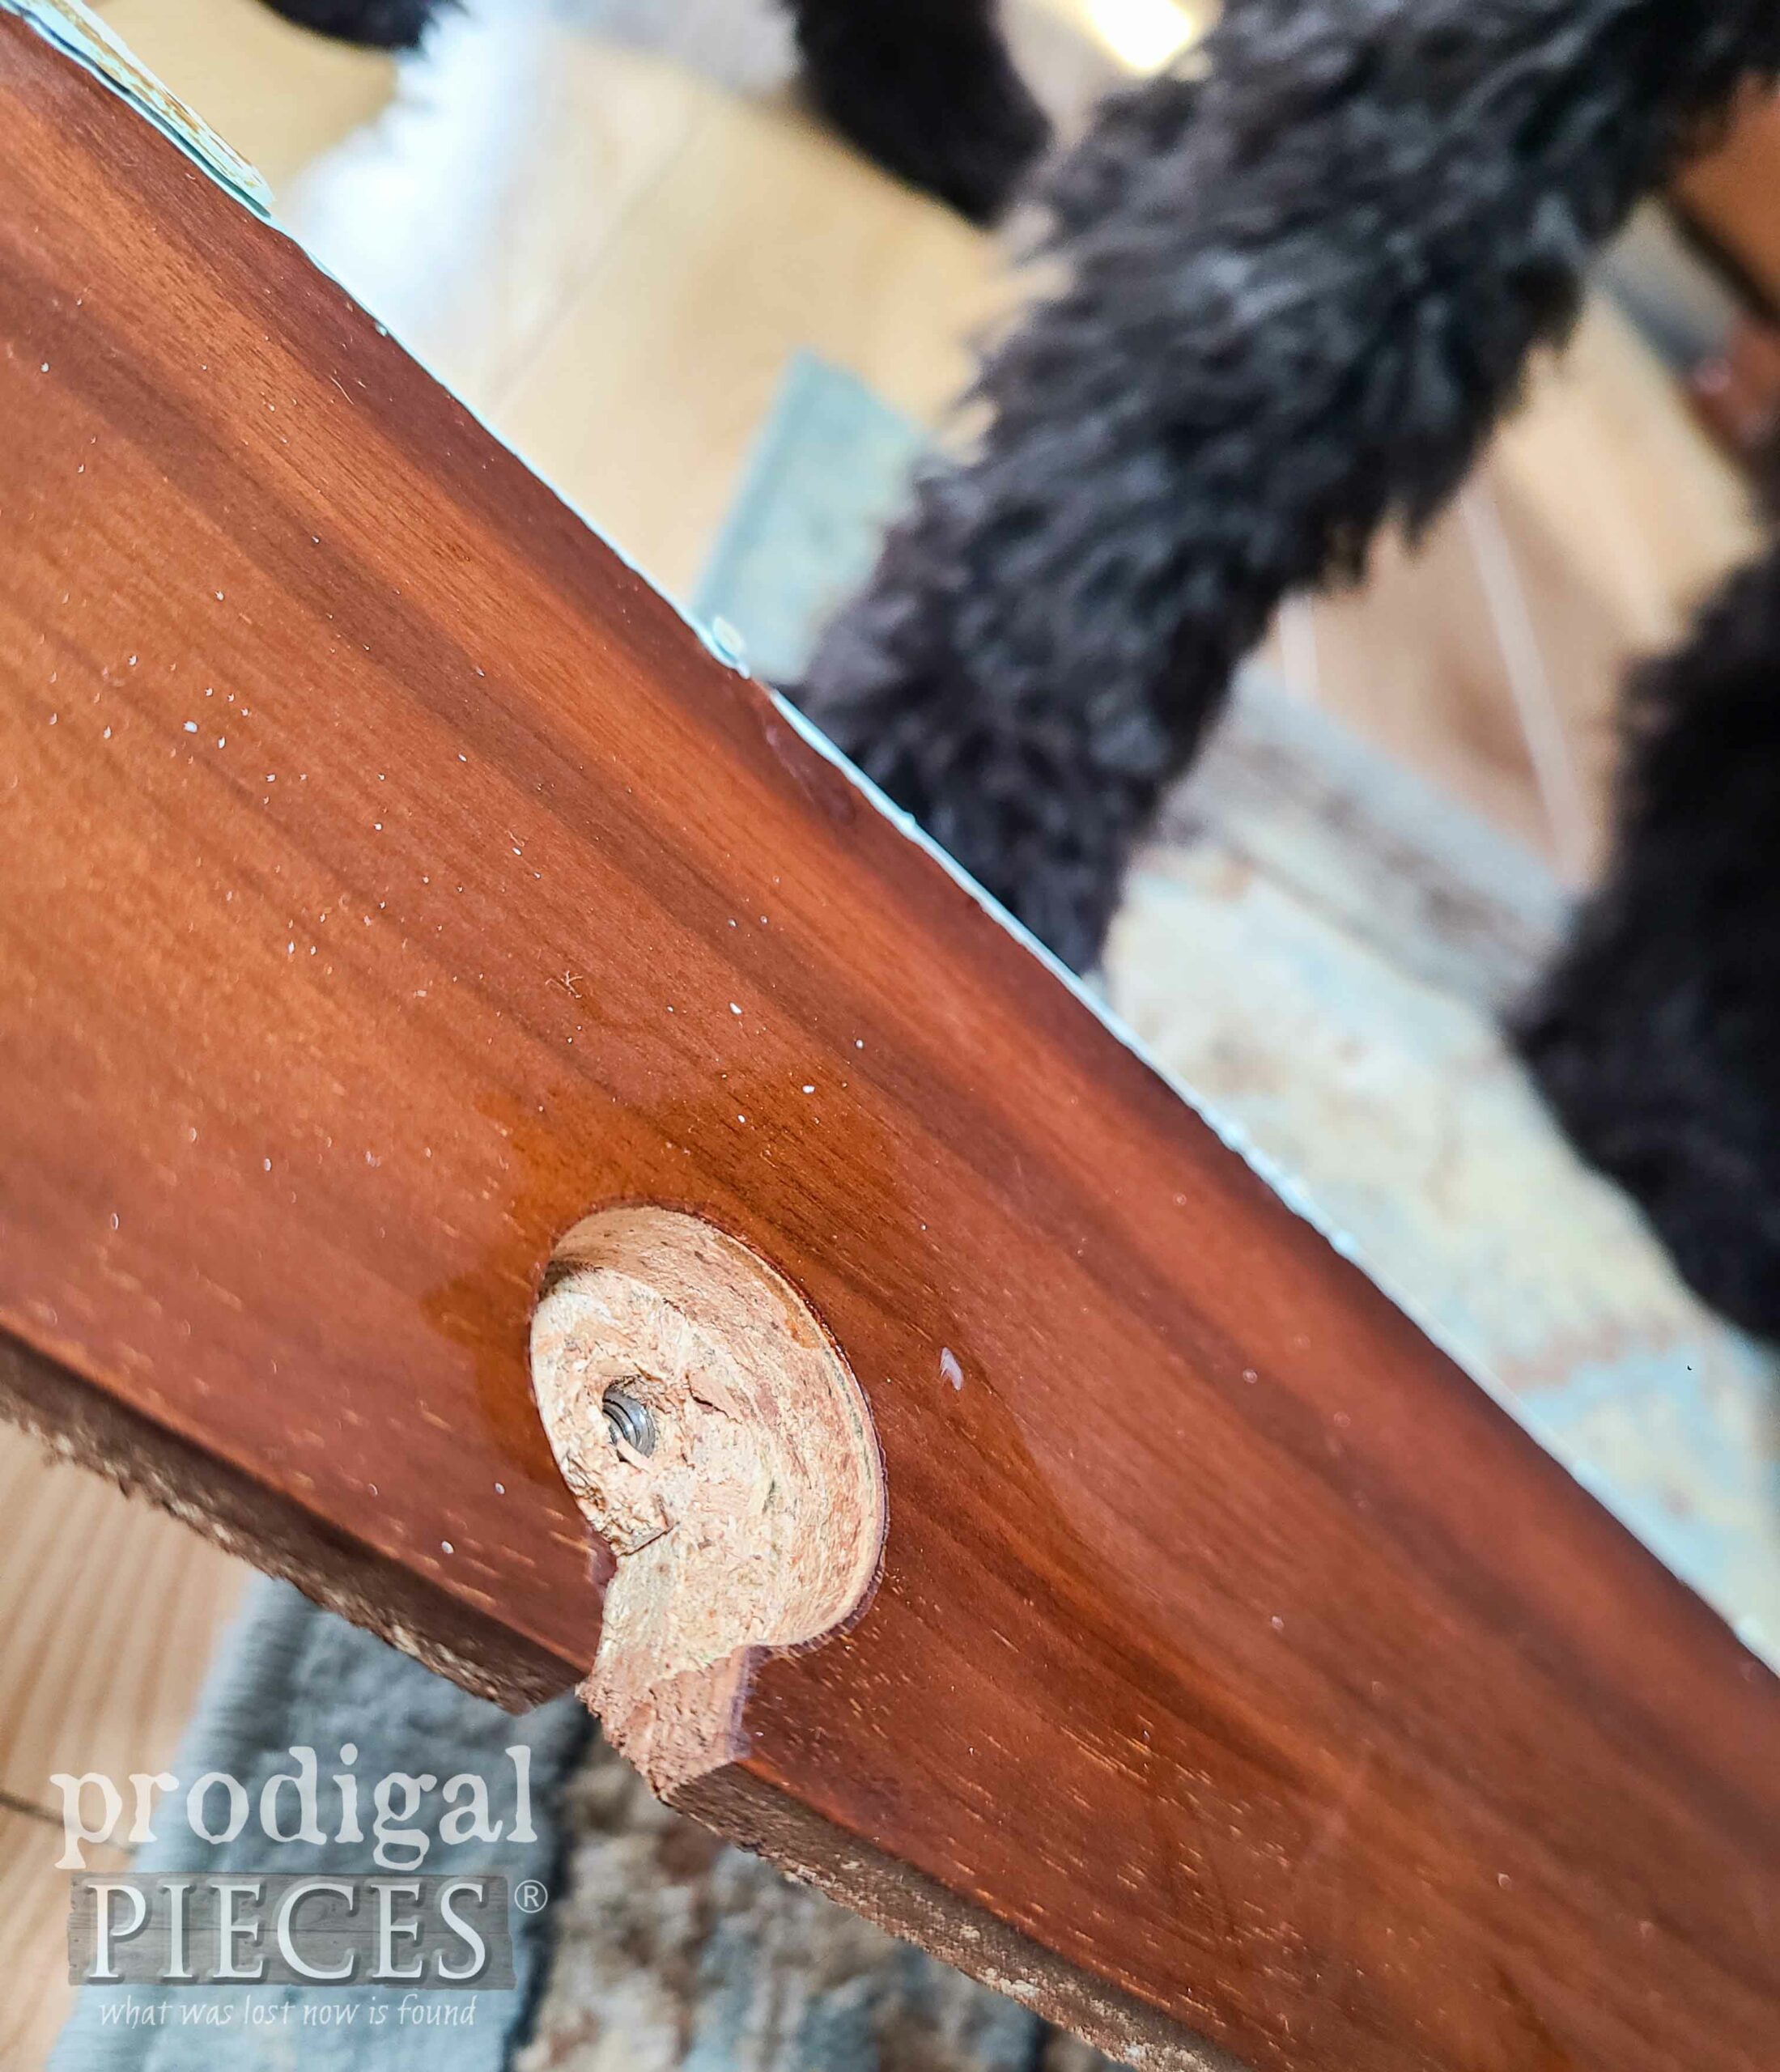 Pressed Board Wood Repurposed Sewing Machine Table Top | prodigalpieces.com #prodigalpieces